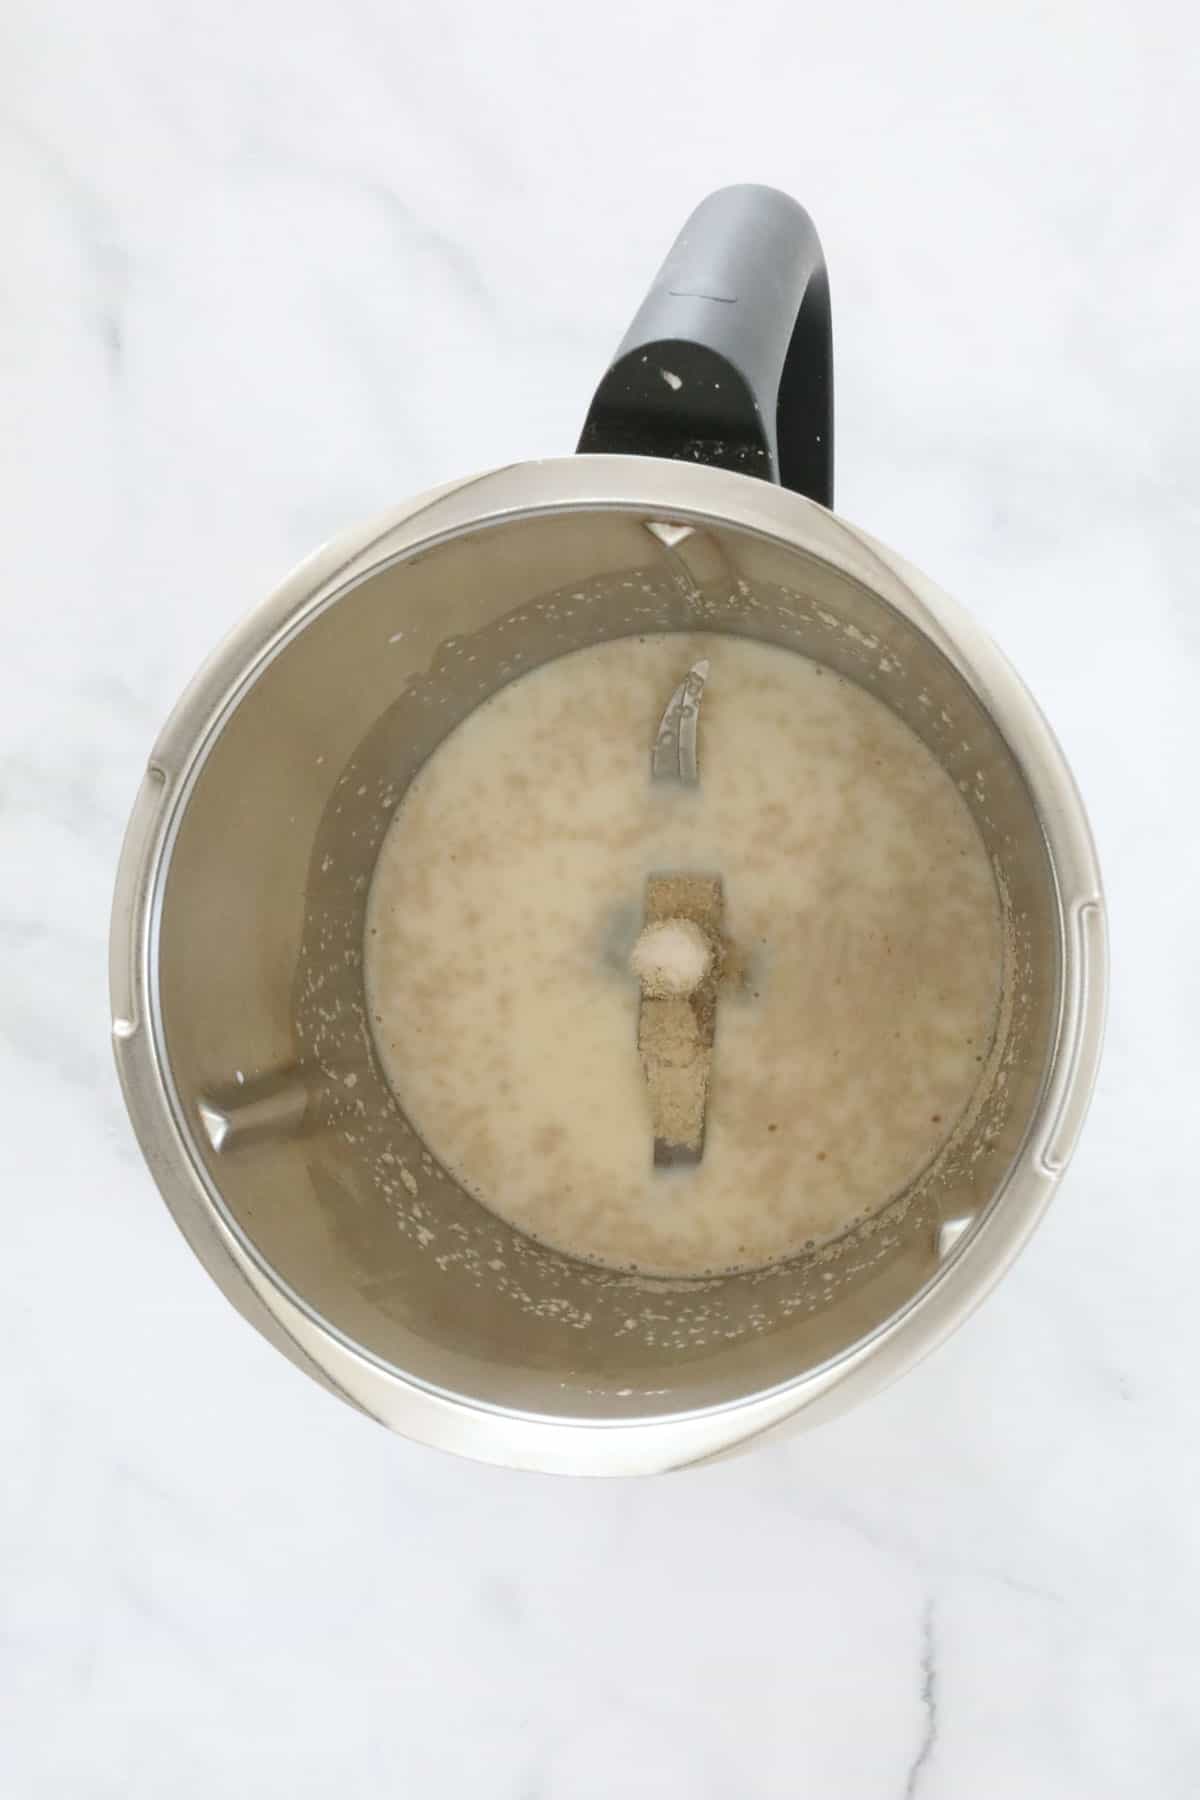 Yeast and water in a Thermomix.